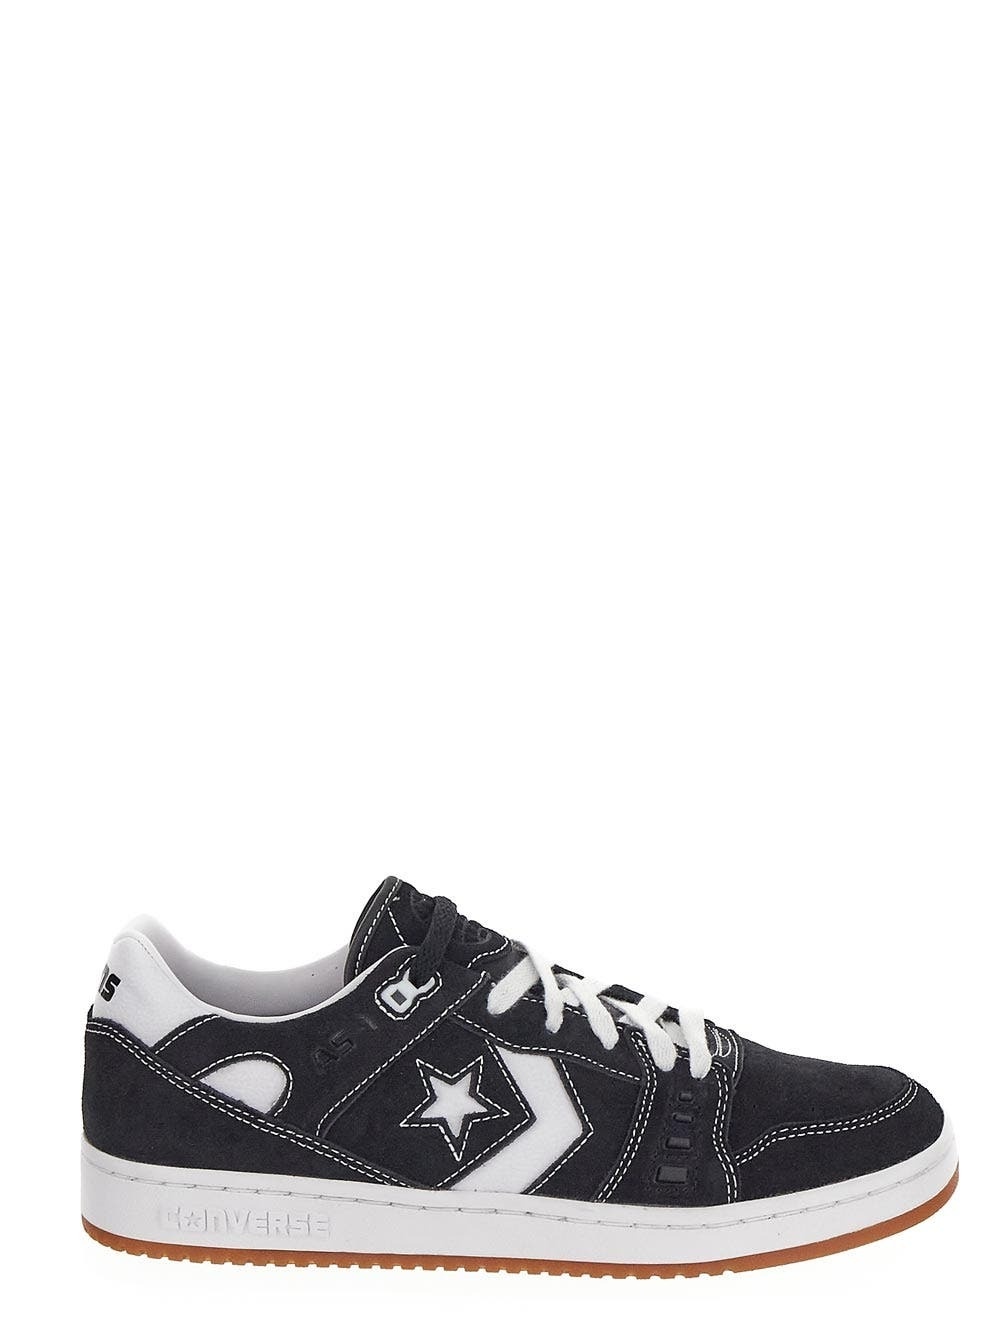 Photo: Converse As 1 Pro Ox Sneakers